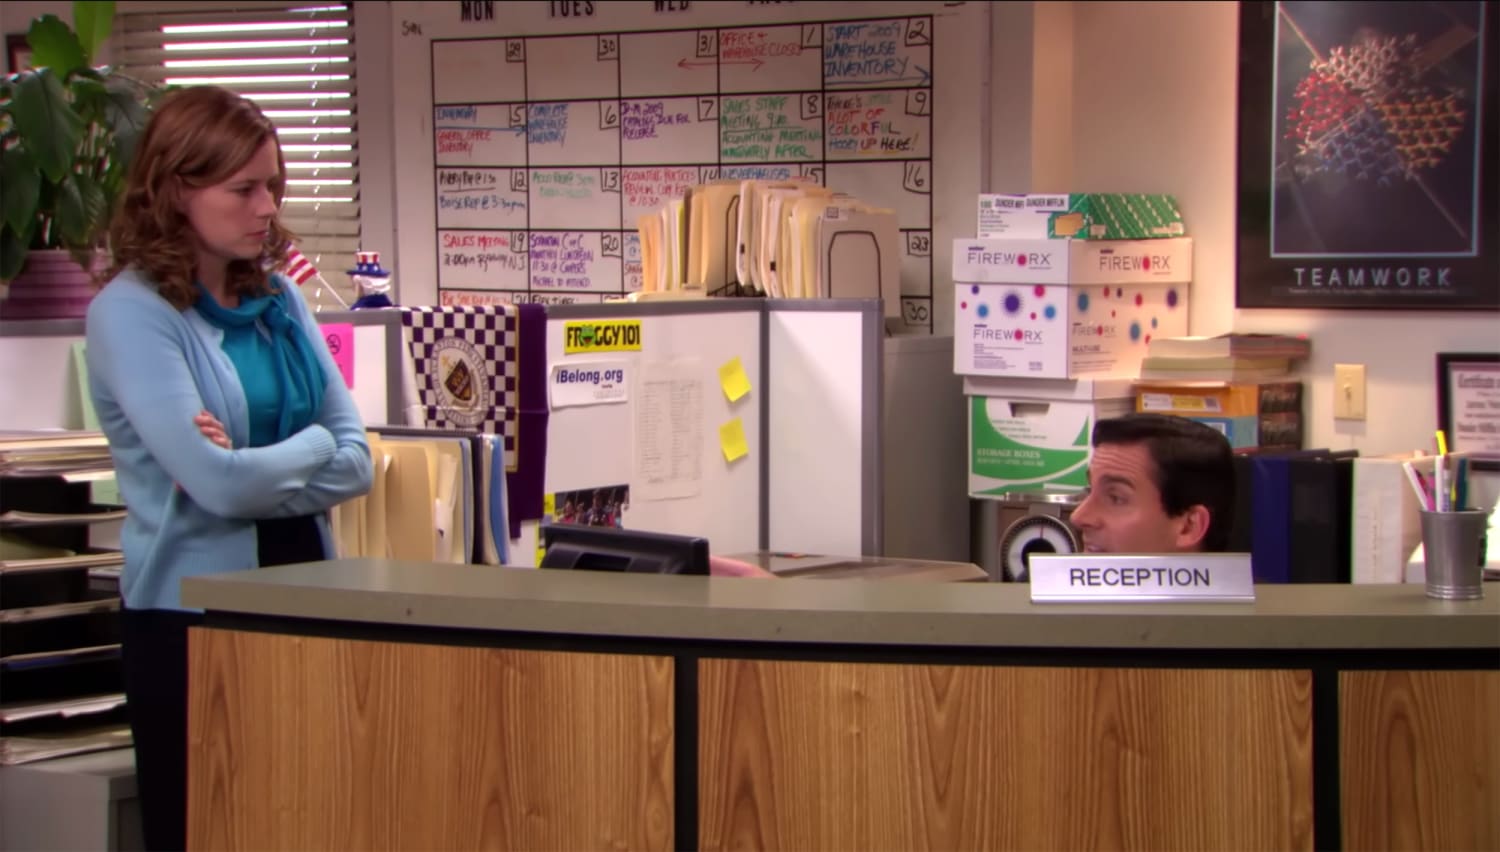 In The Office episode 'Dunder Mifflin Infinity' Michael has his homemade  salad dressing on his desk, Great Scott. Referenced in a deleted scene from  the previous episode 'Fun Run'. : r/TVDetails